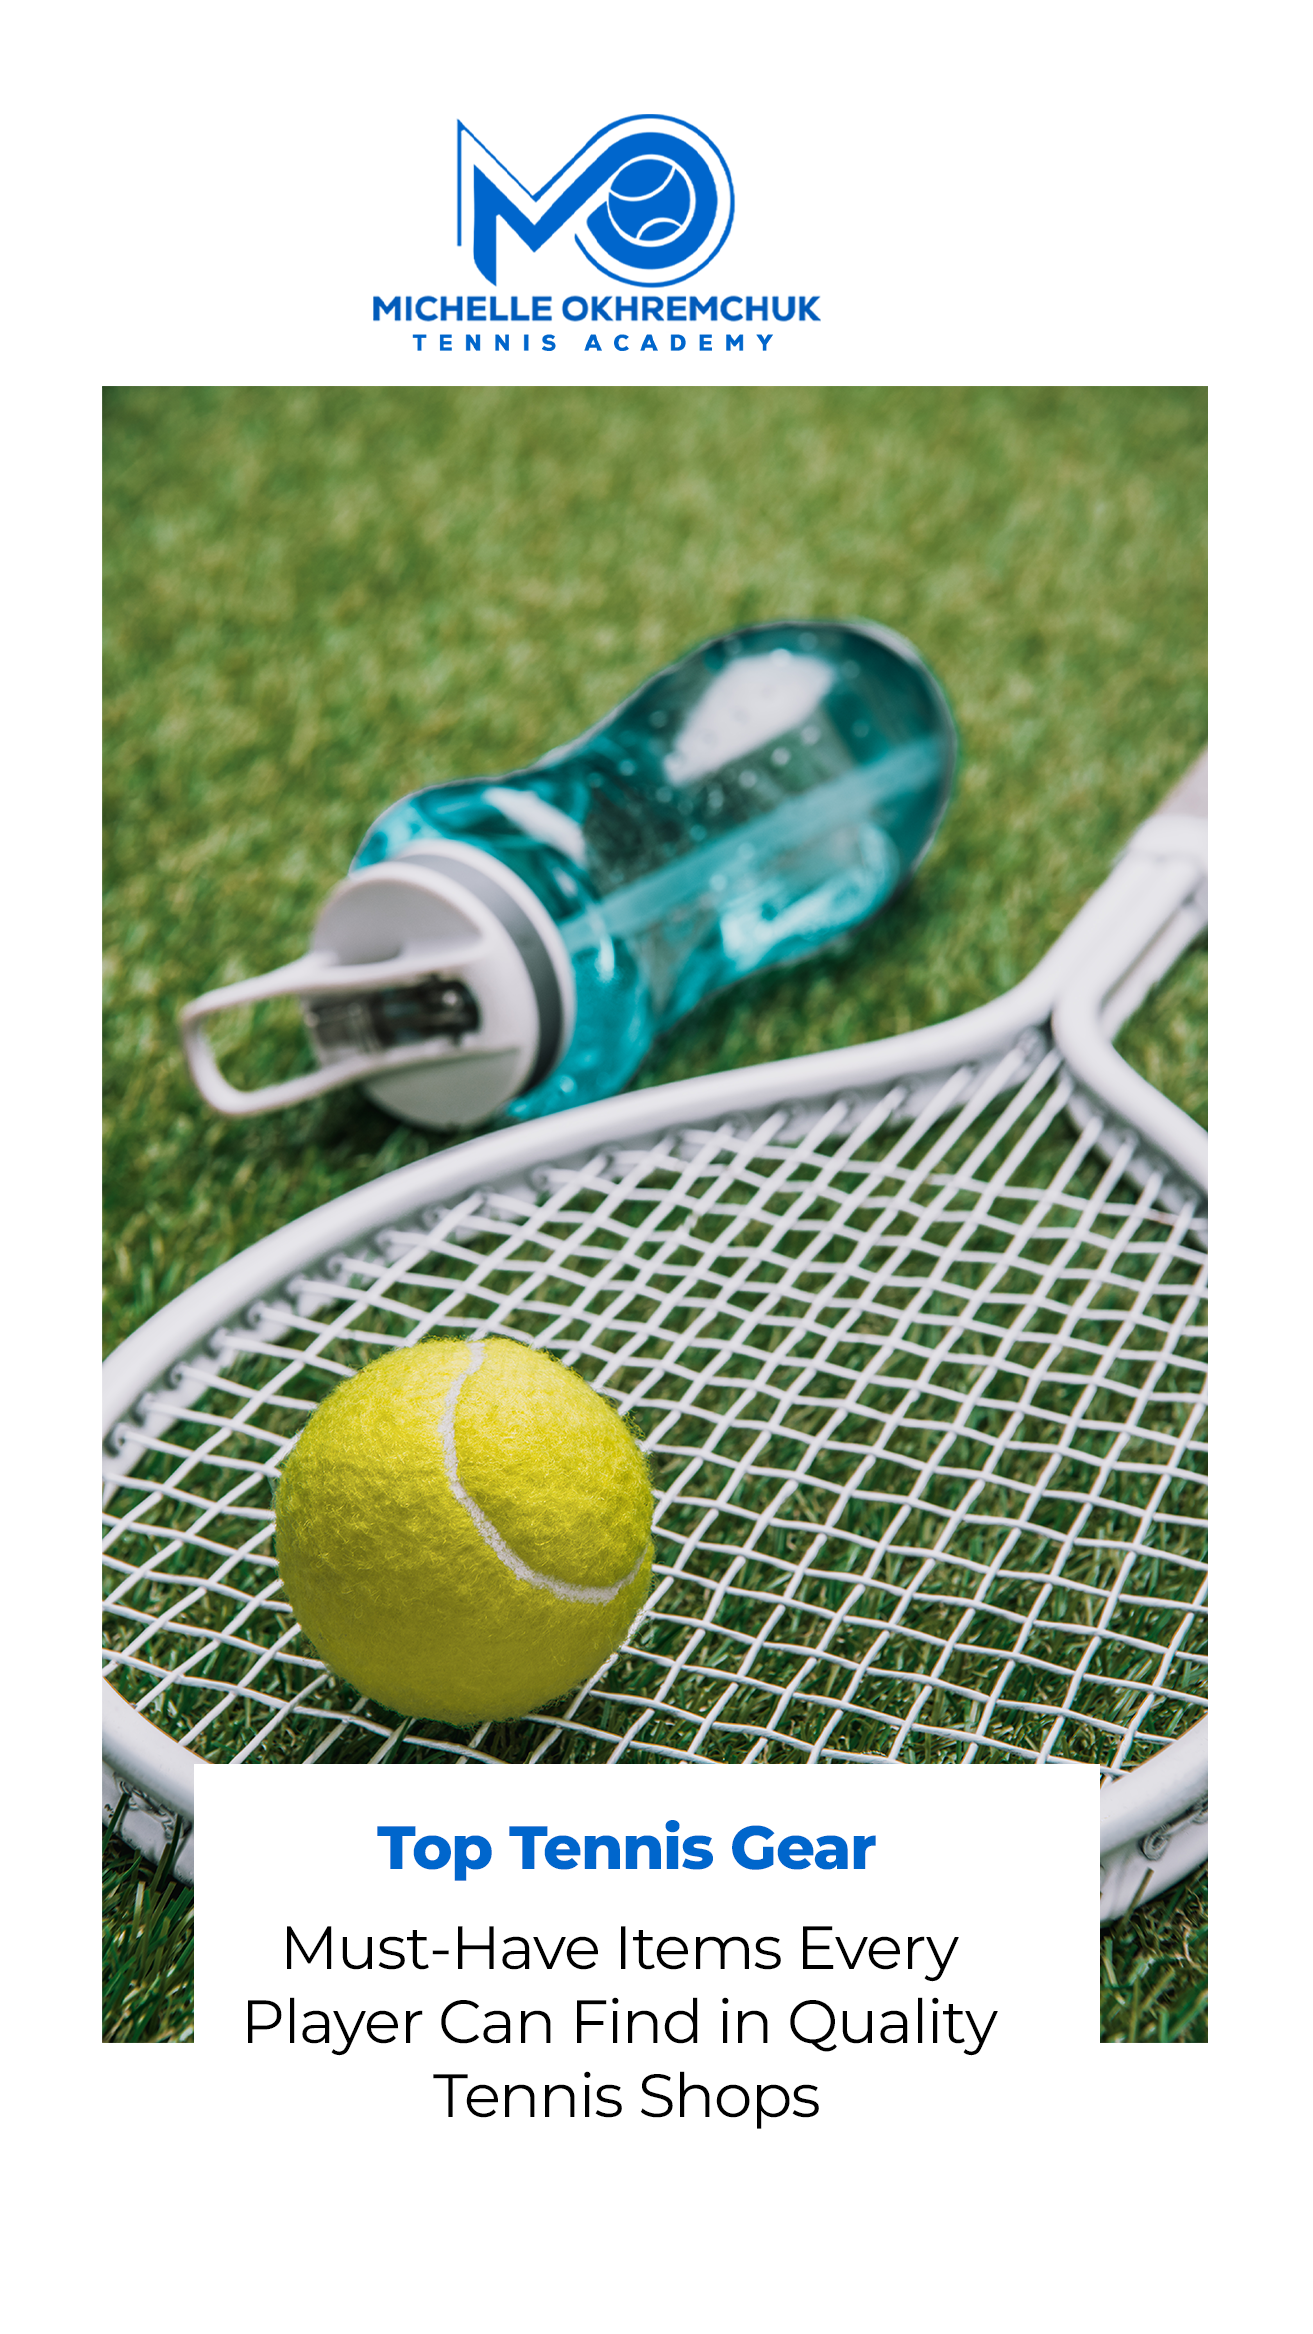 Top Tennis Gear Must-Have Items Every Player Can Find in Quality Tennis Shops - Mo Tennis Training Academy